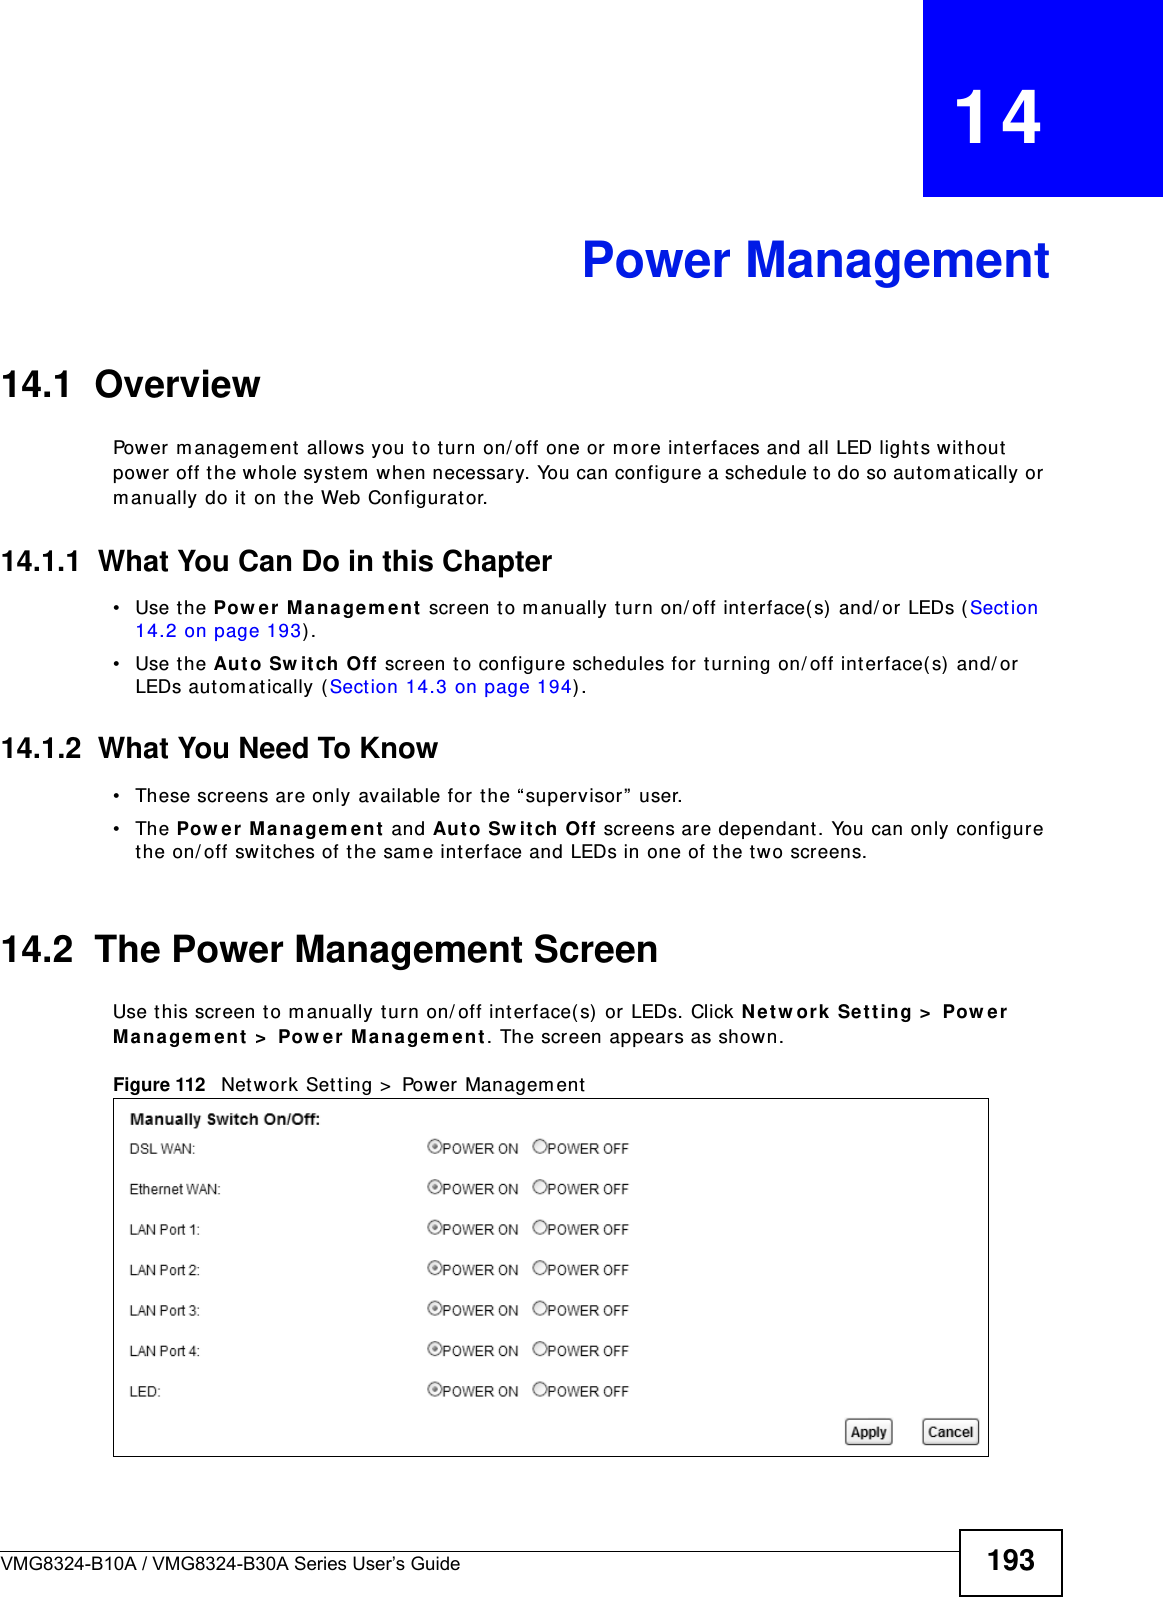 VMG8324-B10A / VMG8324-B30A Series User’s Guide 193CHAPTER   14Power Management14.1  Overview Power m anagem ent allows you to turn on/ off one or m ore int erfaces and all LED light s w ithout  power off t he whole system  when necessary. You can configure a schedule t o do so aut om at ically or m anually do it  on the Web Configurat or.14.1.1  What You Can Do in this Chapter• Use the Pow e r Ma n a ge m e nt  screen to m anually t urn on/ off interface( s) and/ or LEDs ( Sect ion 14.2 on page 193) . • Use the Aut o Sw it ch  Off screen t o configure schedules for t urning on/ off int erface( s)  and/ or LEDs autom at ically ( Sect ion 14.3 on page 194) .14.1.2  What You Need To Know• These screens are only available for t he “ supervisor ”  user.• The Pow e r  M ana gem e n t  and Au t o Sw it ch  Off screens are dependant . You can only configure the on/ off swit ches of t he sam e interface and LEDs in one of the two screens.14.2  The Power Management ScreenUse t his screen to m anually t urn on/ off int erface(s) or LEDs. Click Ne t w or k  Se t t ing &gt;  Pow er M an age m e nt  &gt;  Pow er Ma na gem e n t . The screen appears as shown.Figure 112   Net work Set t ing &gt;  Power Managem ent